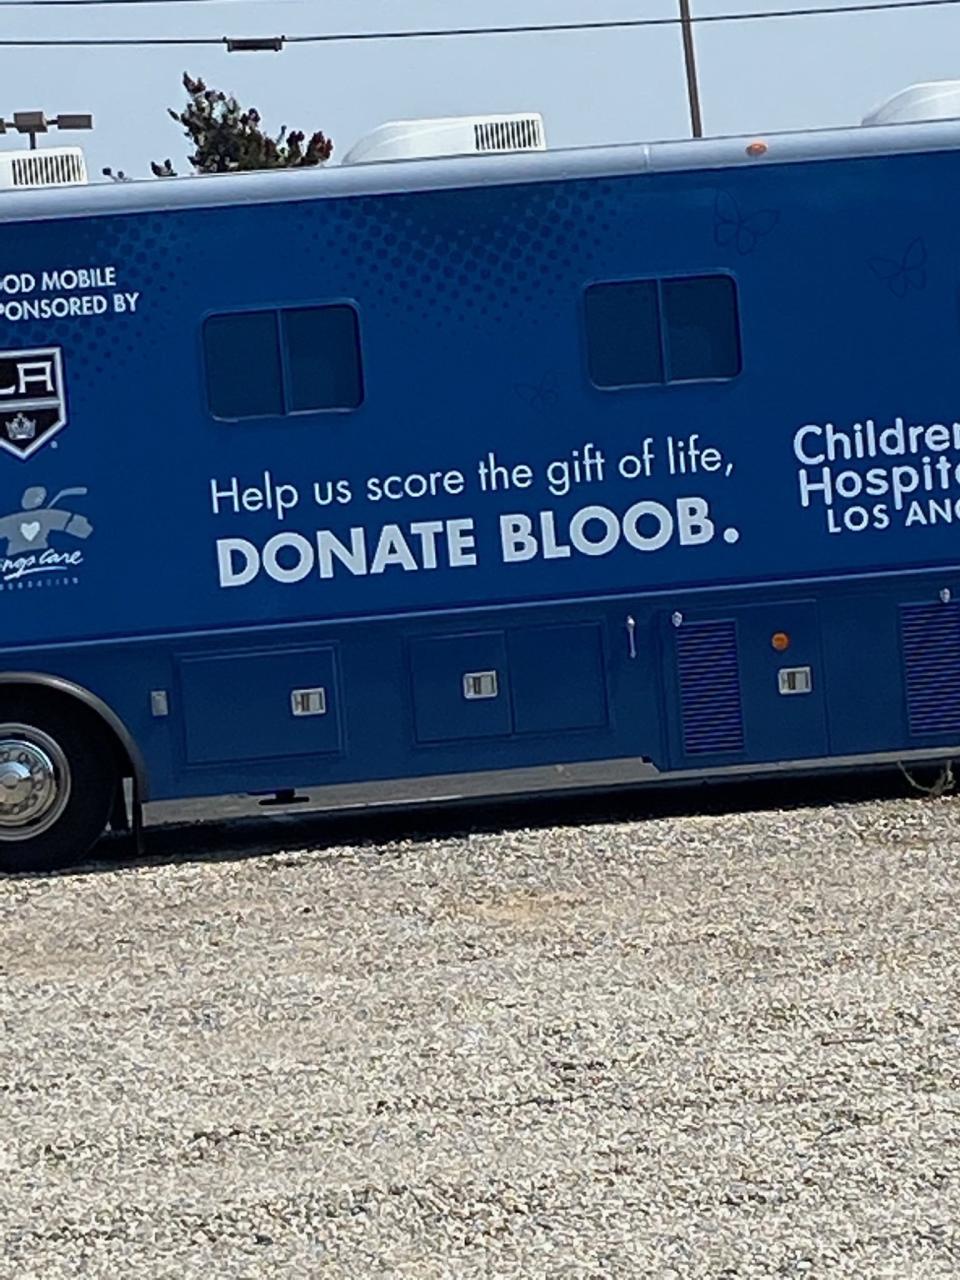 sign asking people to donate bloob